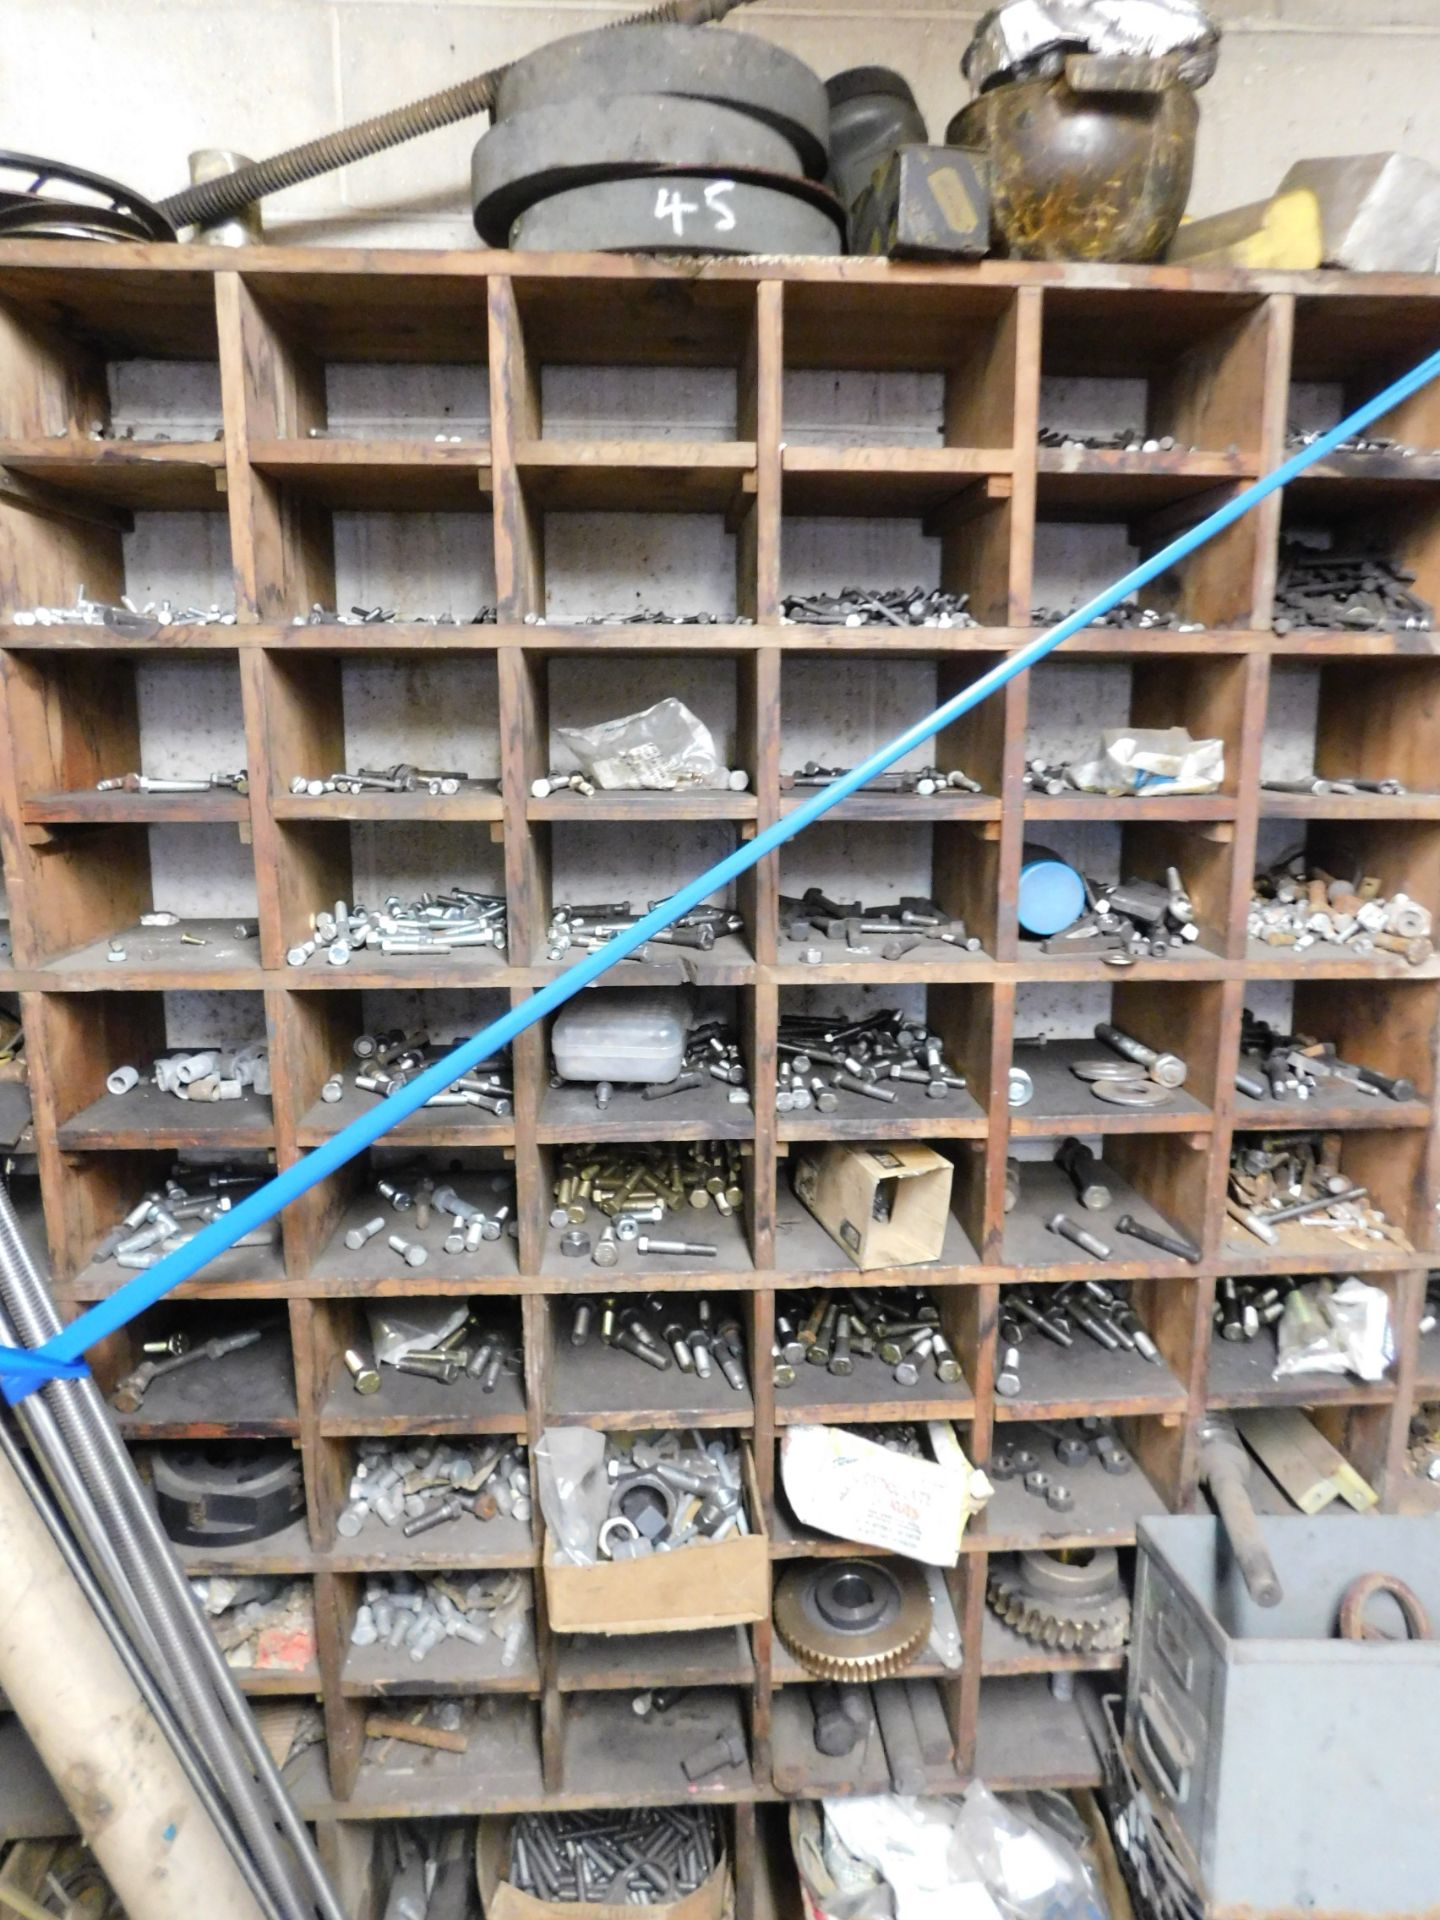 Contents of Shelves, Various Size and Types of Bolts, Nuts, All Thread, Hold Downs, Etc - Image 2 of 3